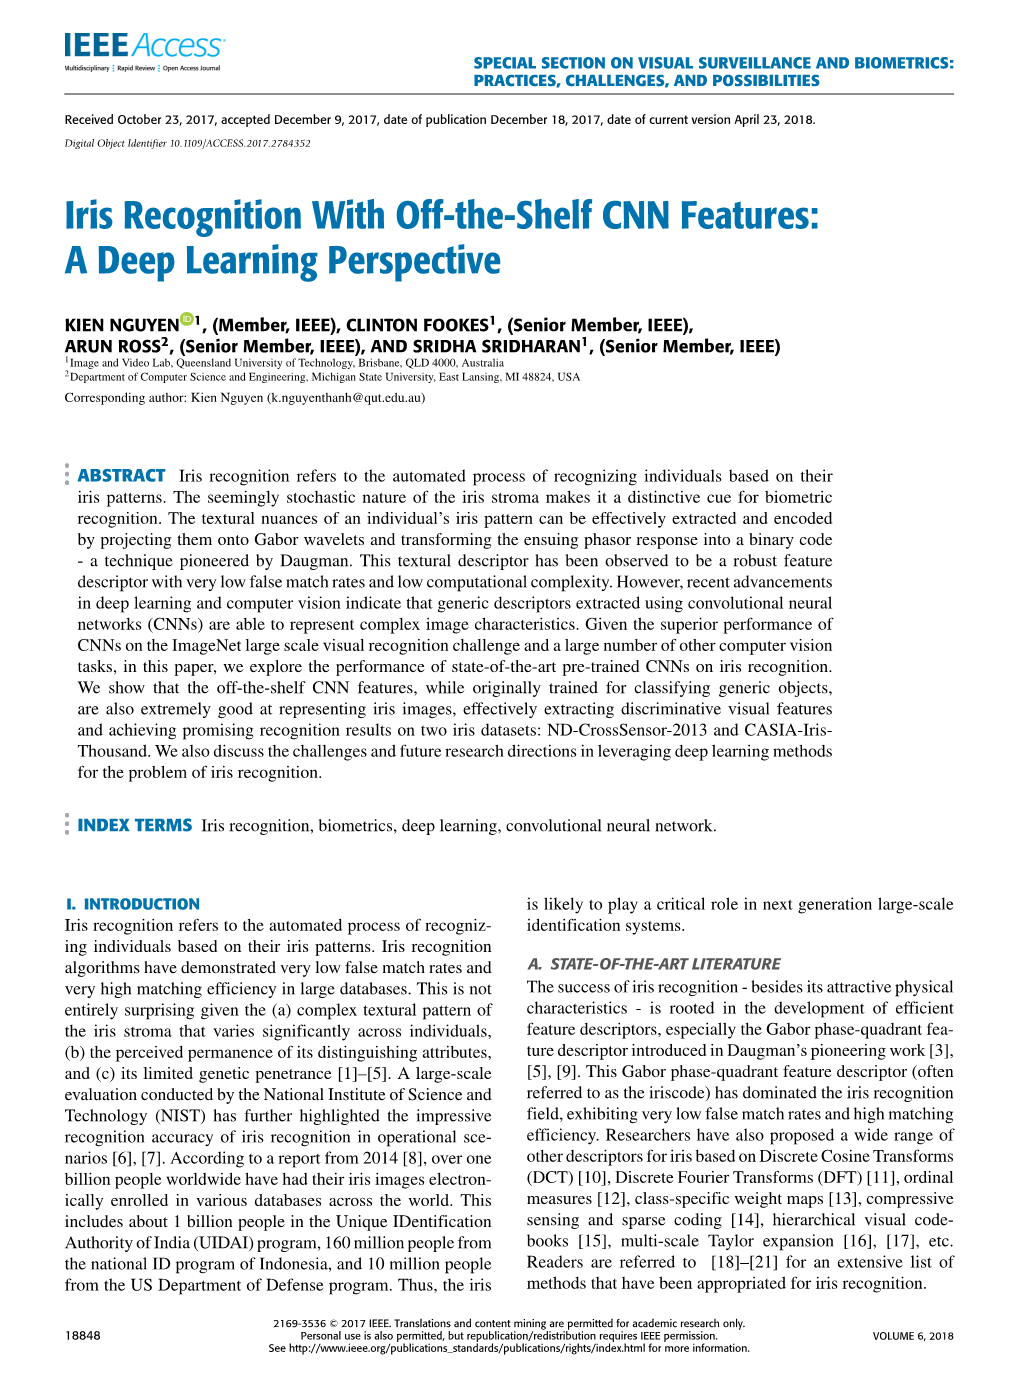 Iris Recognition with Off-The-Shelf CNN Features: a Deep Learning Perspective